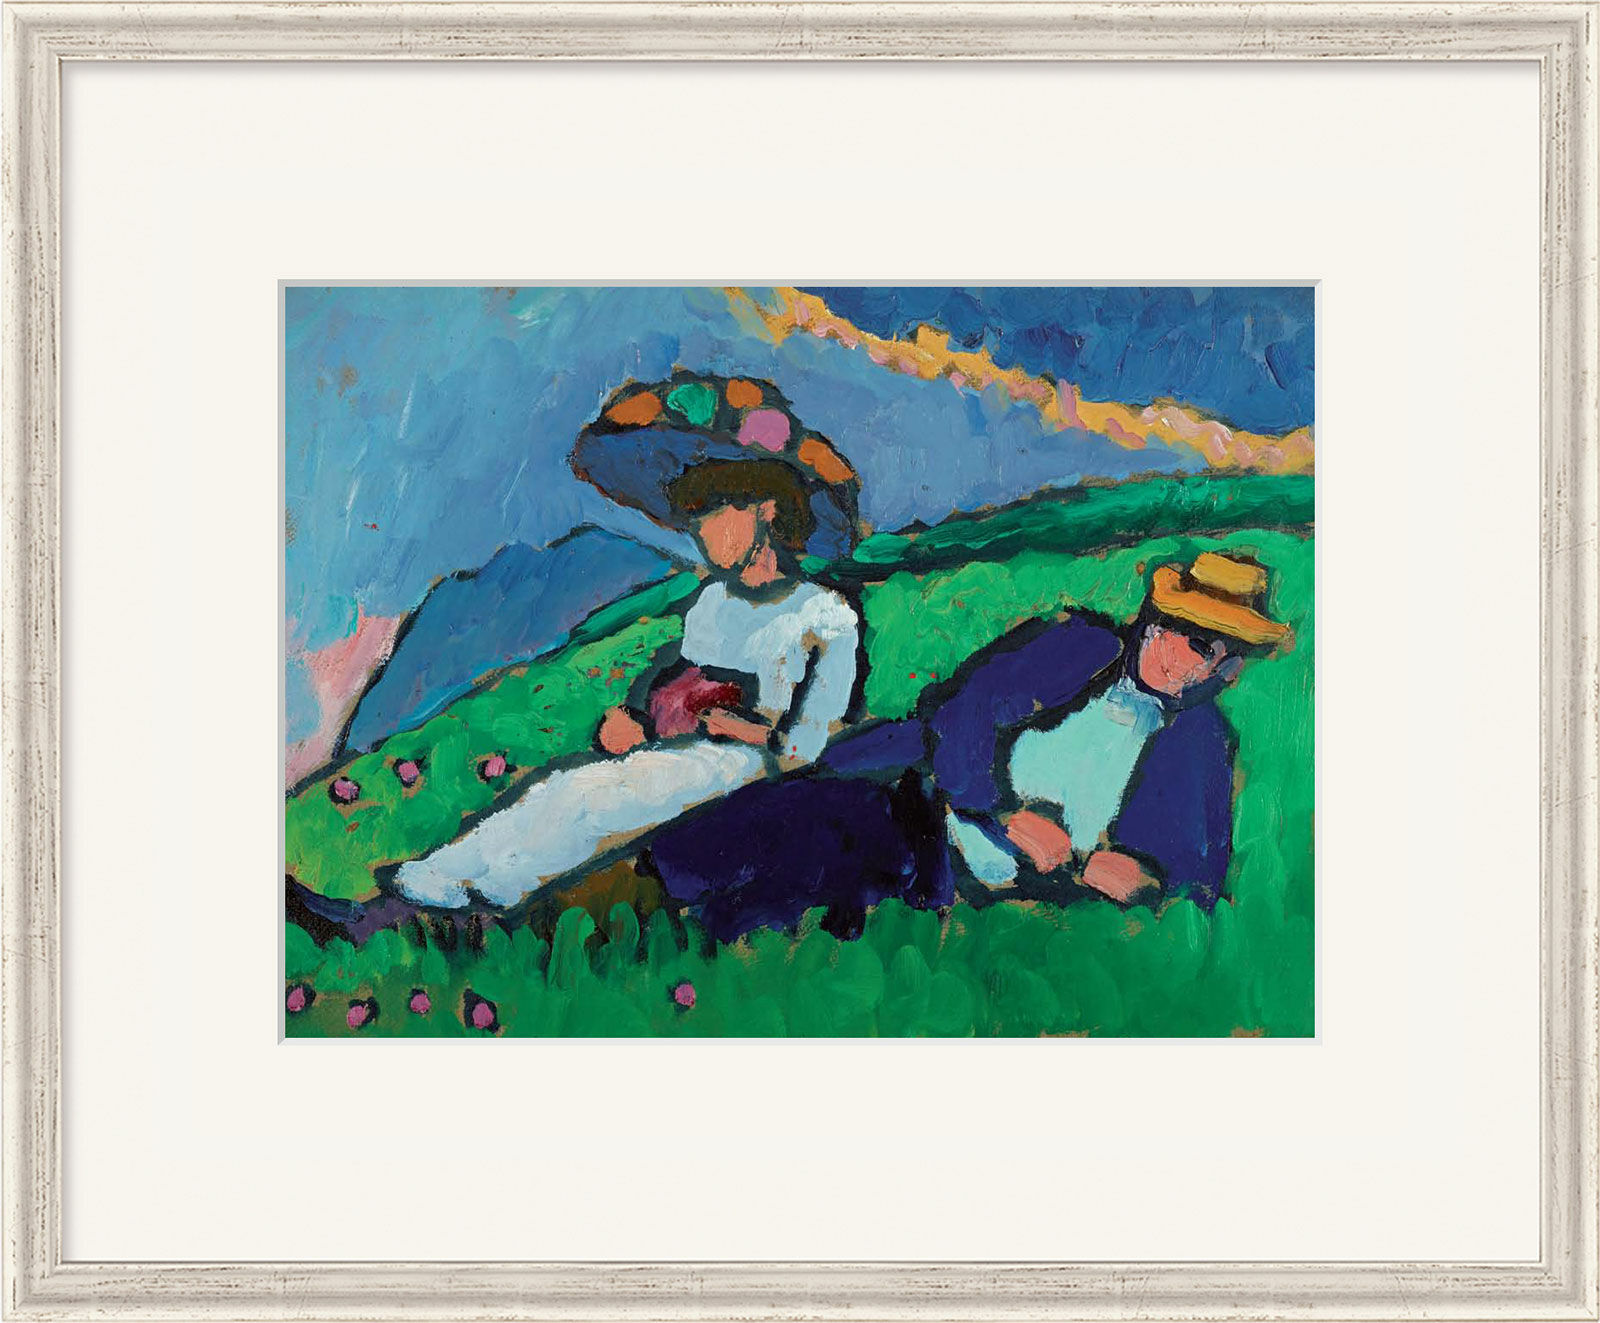 Picture "Jawlensky and Werefkin" (1909), framed by Gabriele Münter